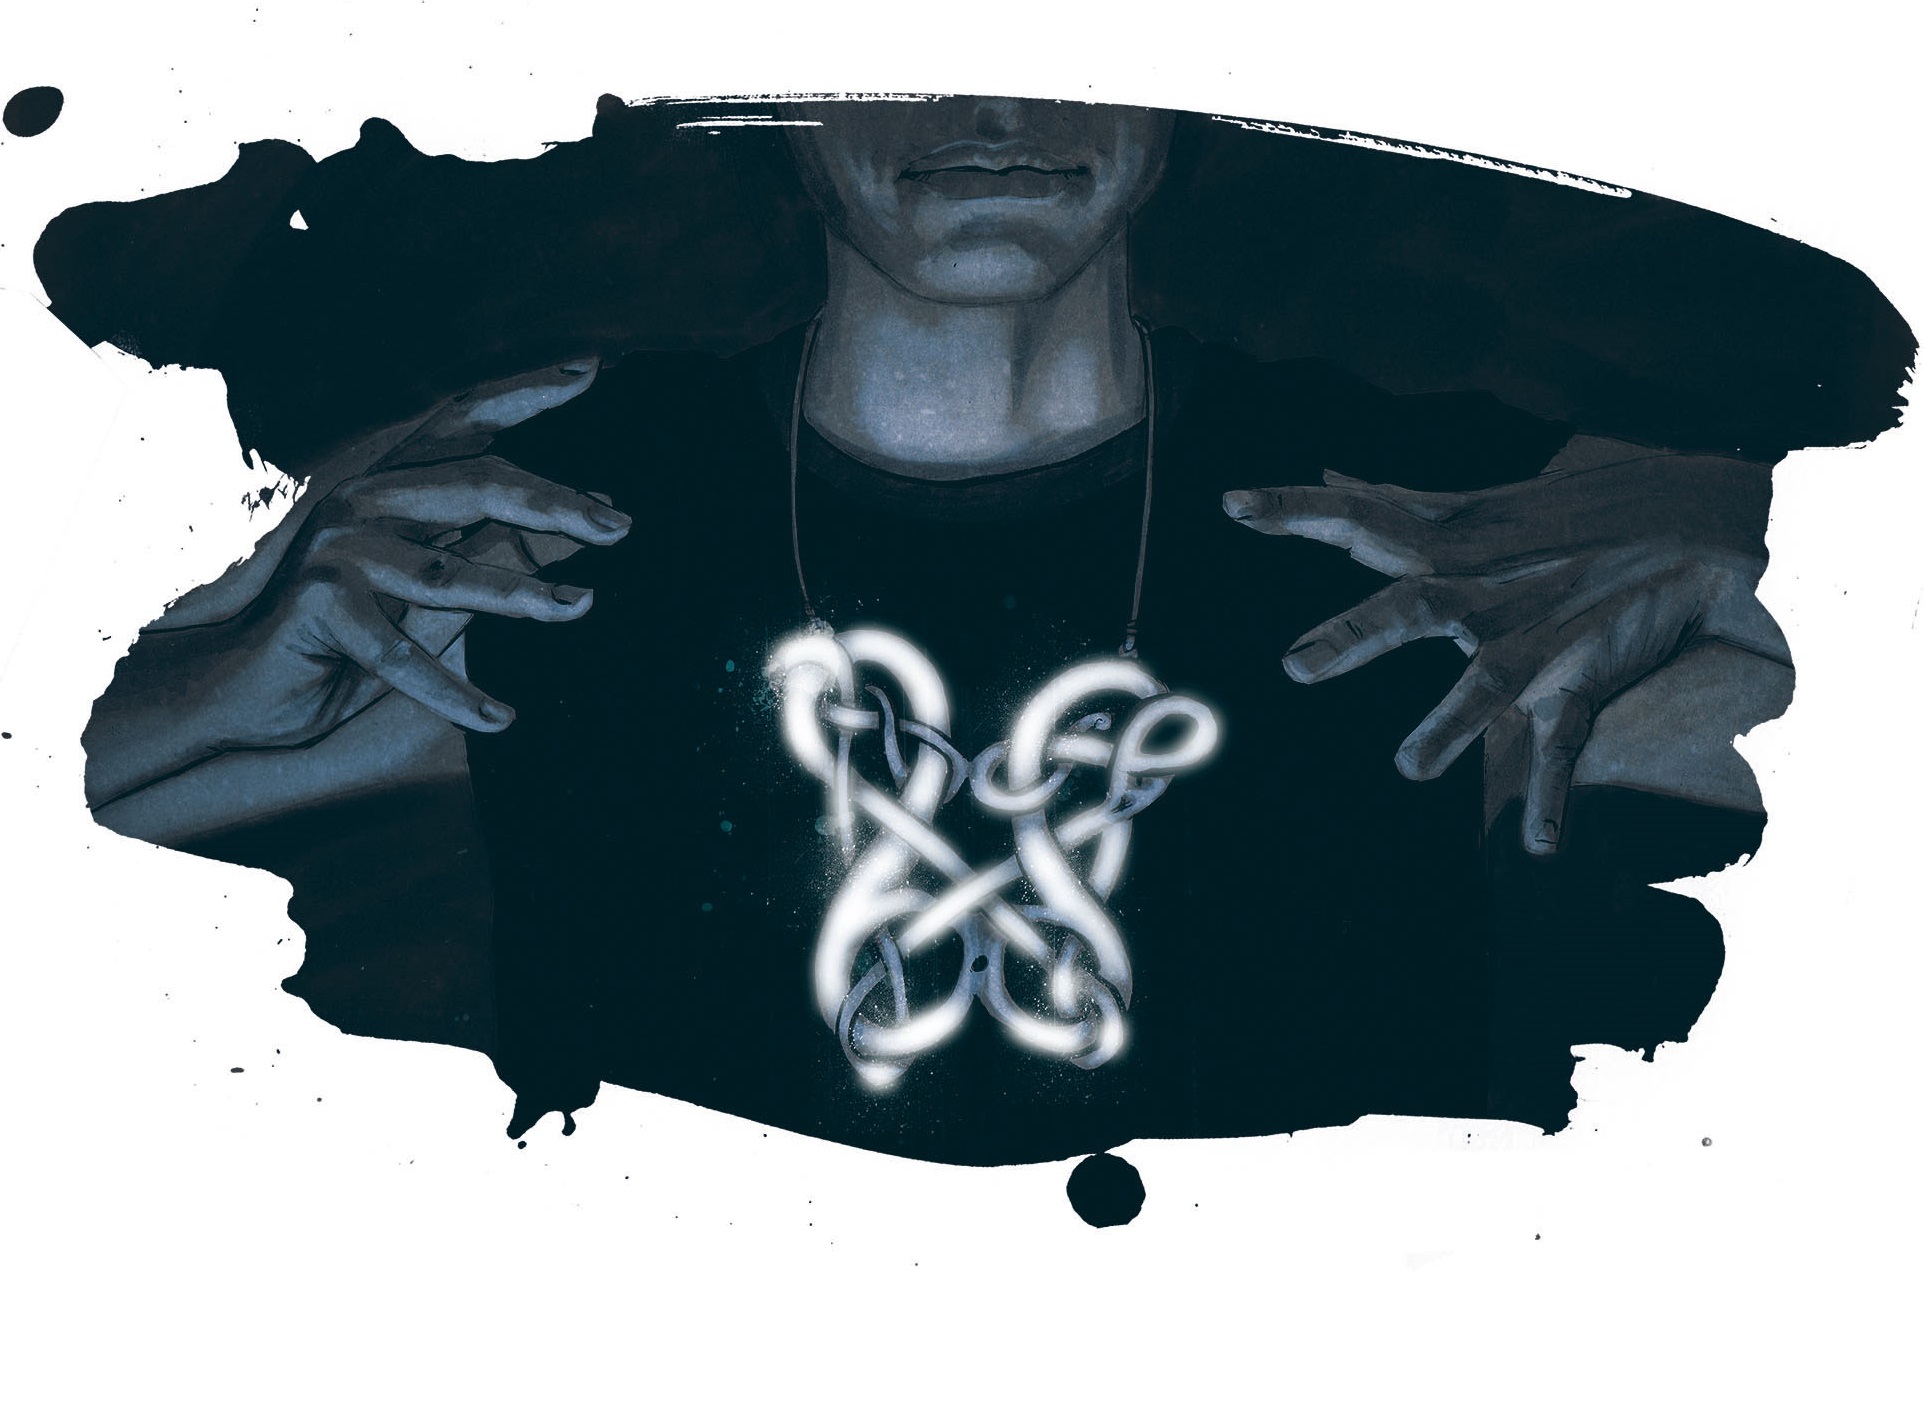 An illustration of someone making strange signs with their hands while an intricate necklace they are wearing glows